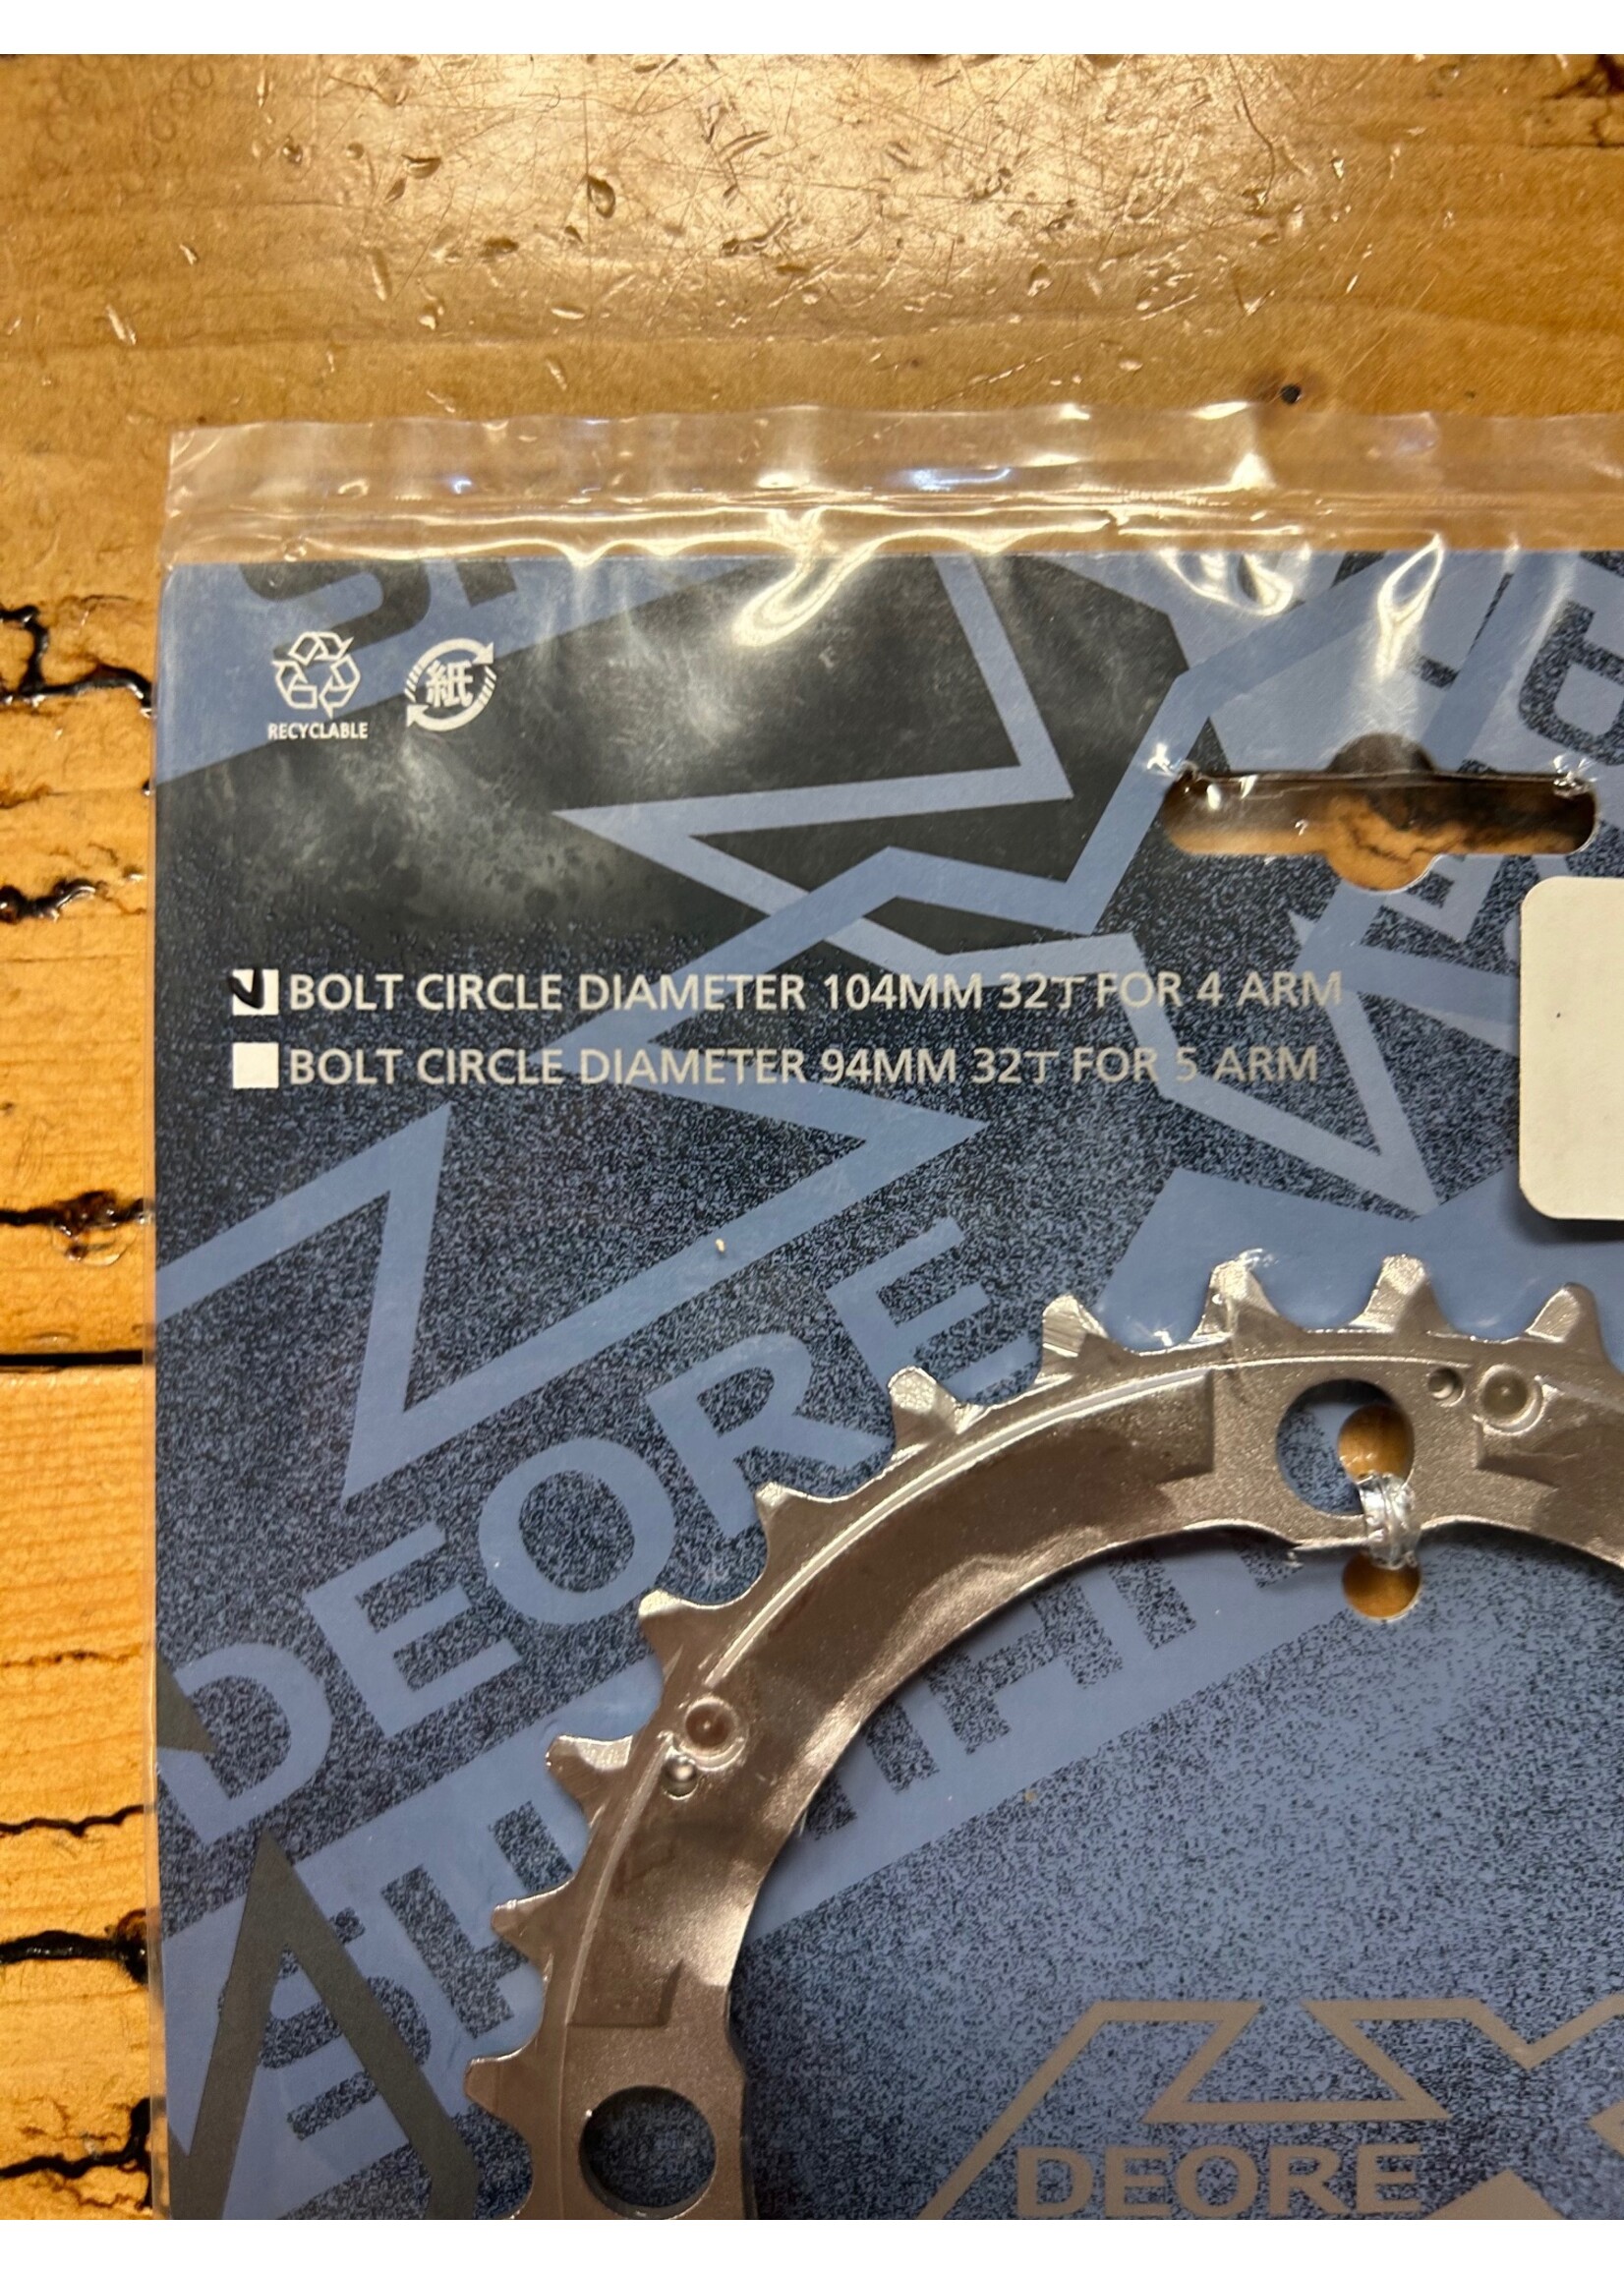 SHIMANO Shimano Deore LX 32 Tooth 104 BCD 9 Speed Chainring NOS